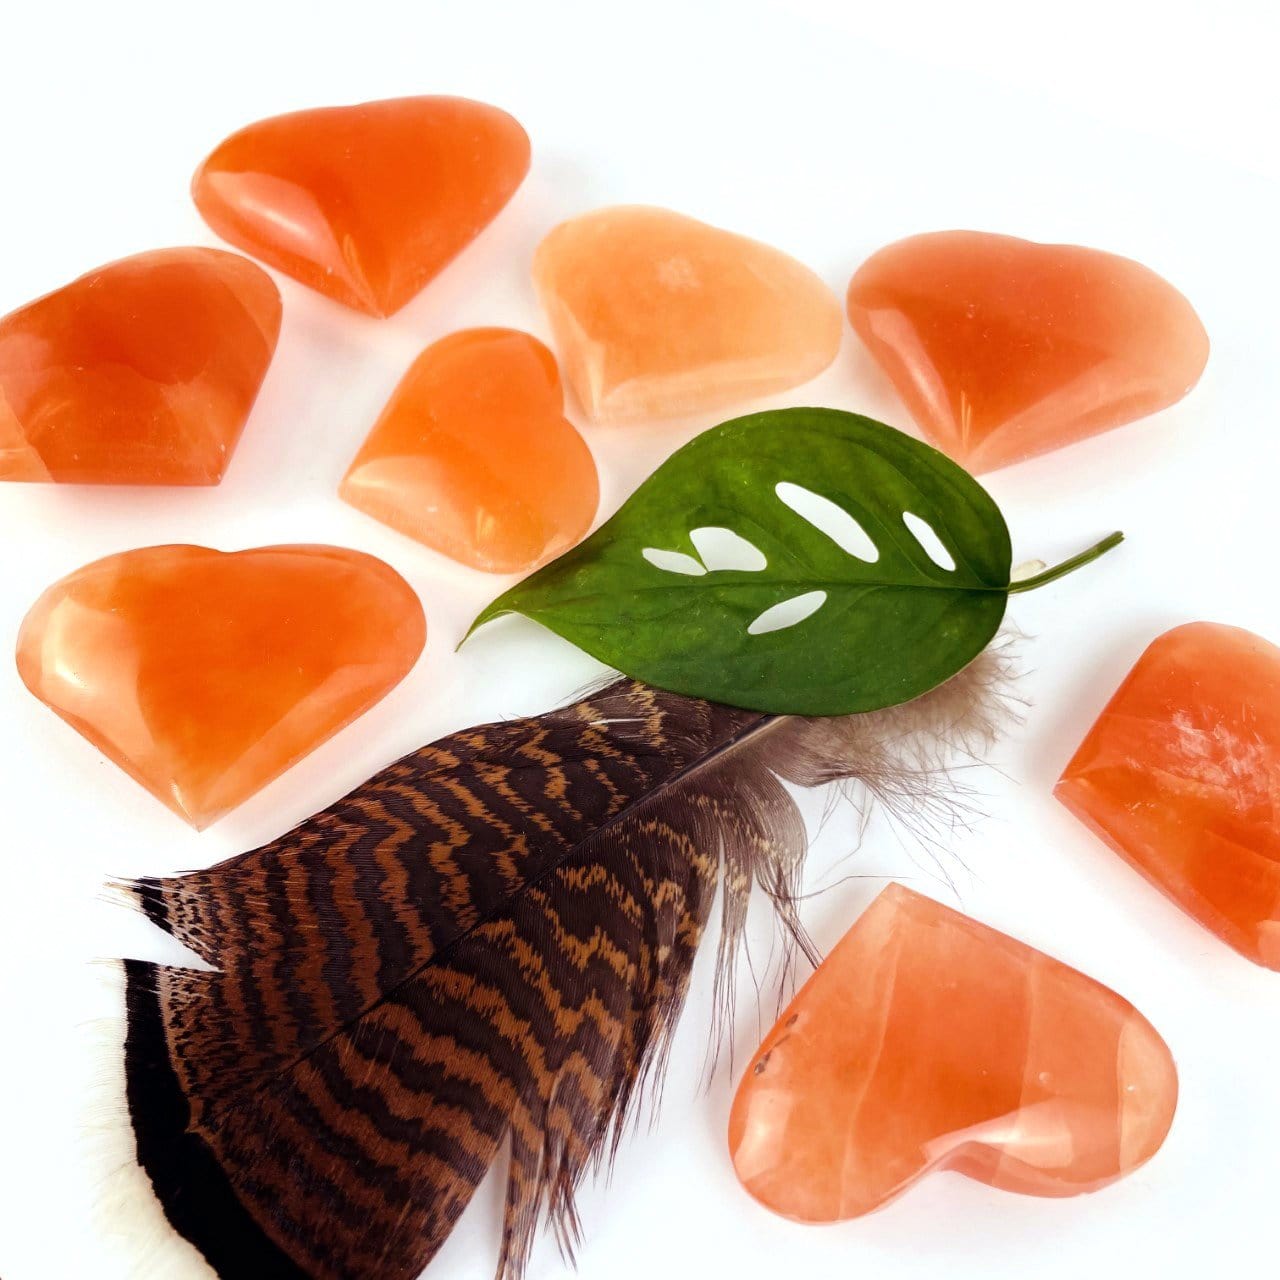 8 Orange Selenite Puffy Hearts around a leaf and feather 